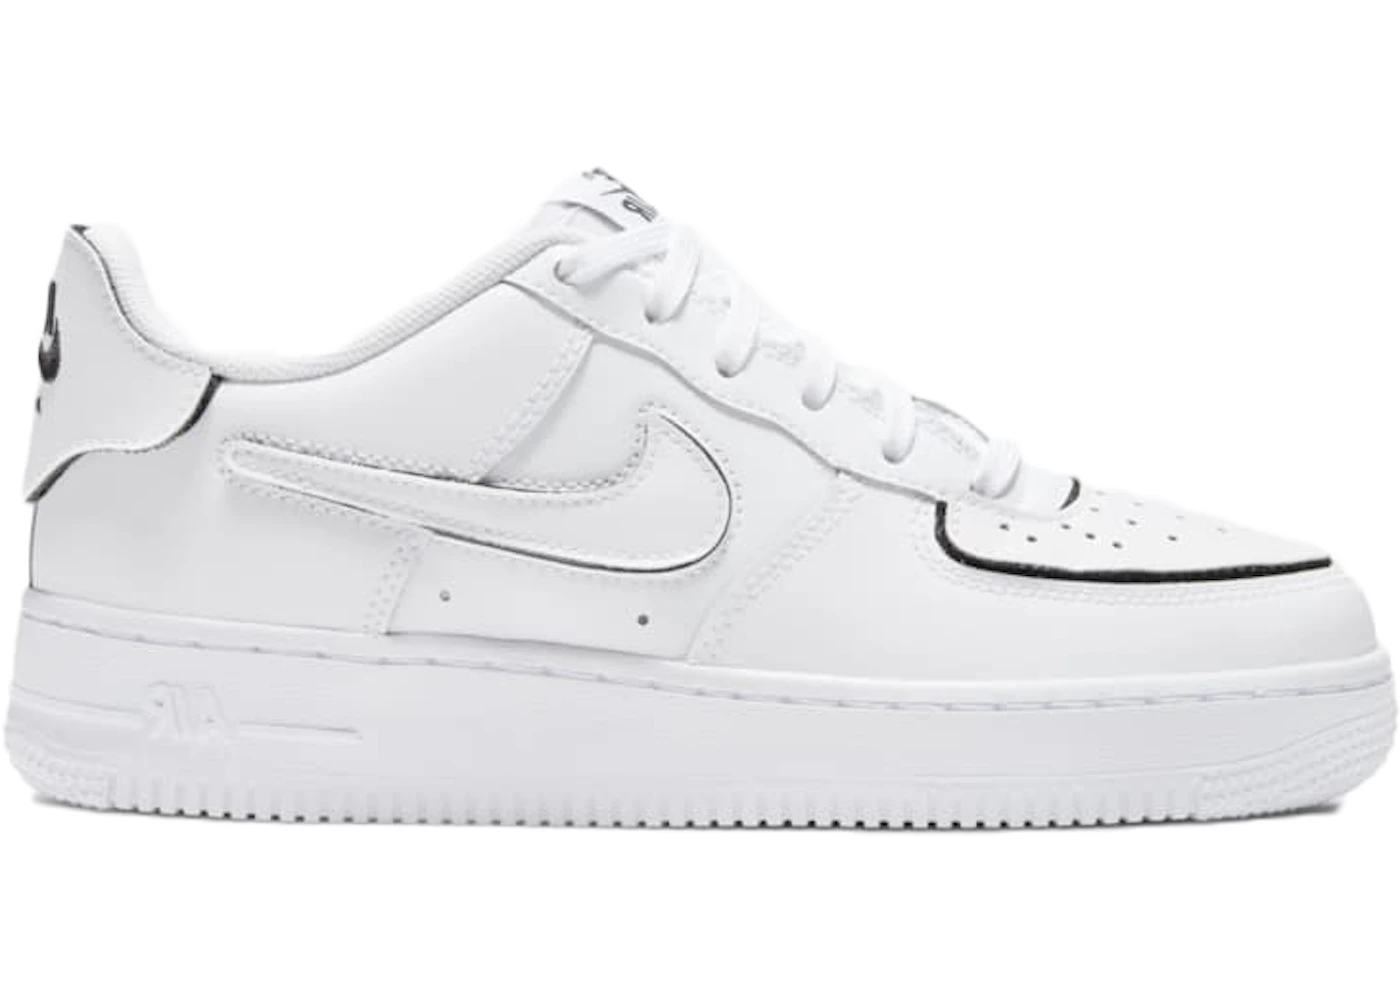 Nike Air Force 1/1 Cosmic Clay (GS) キッズ - CT3840-100 - JP